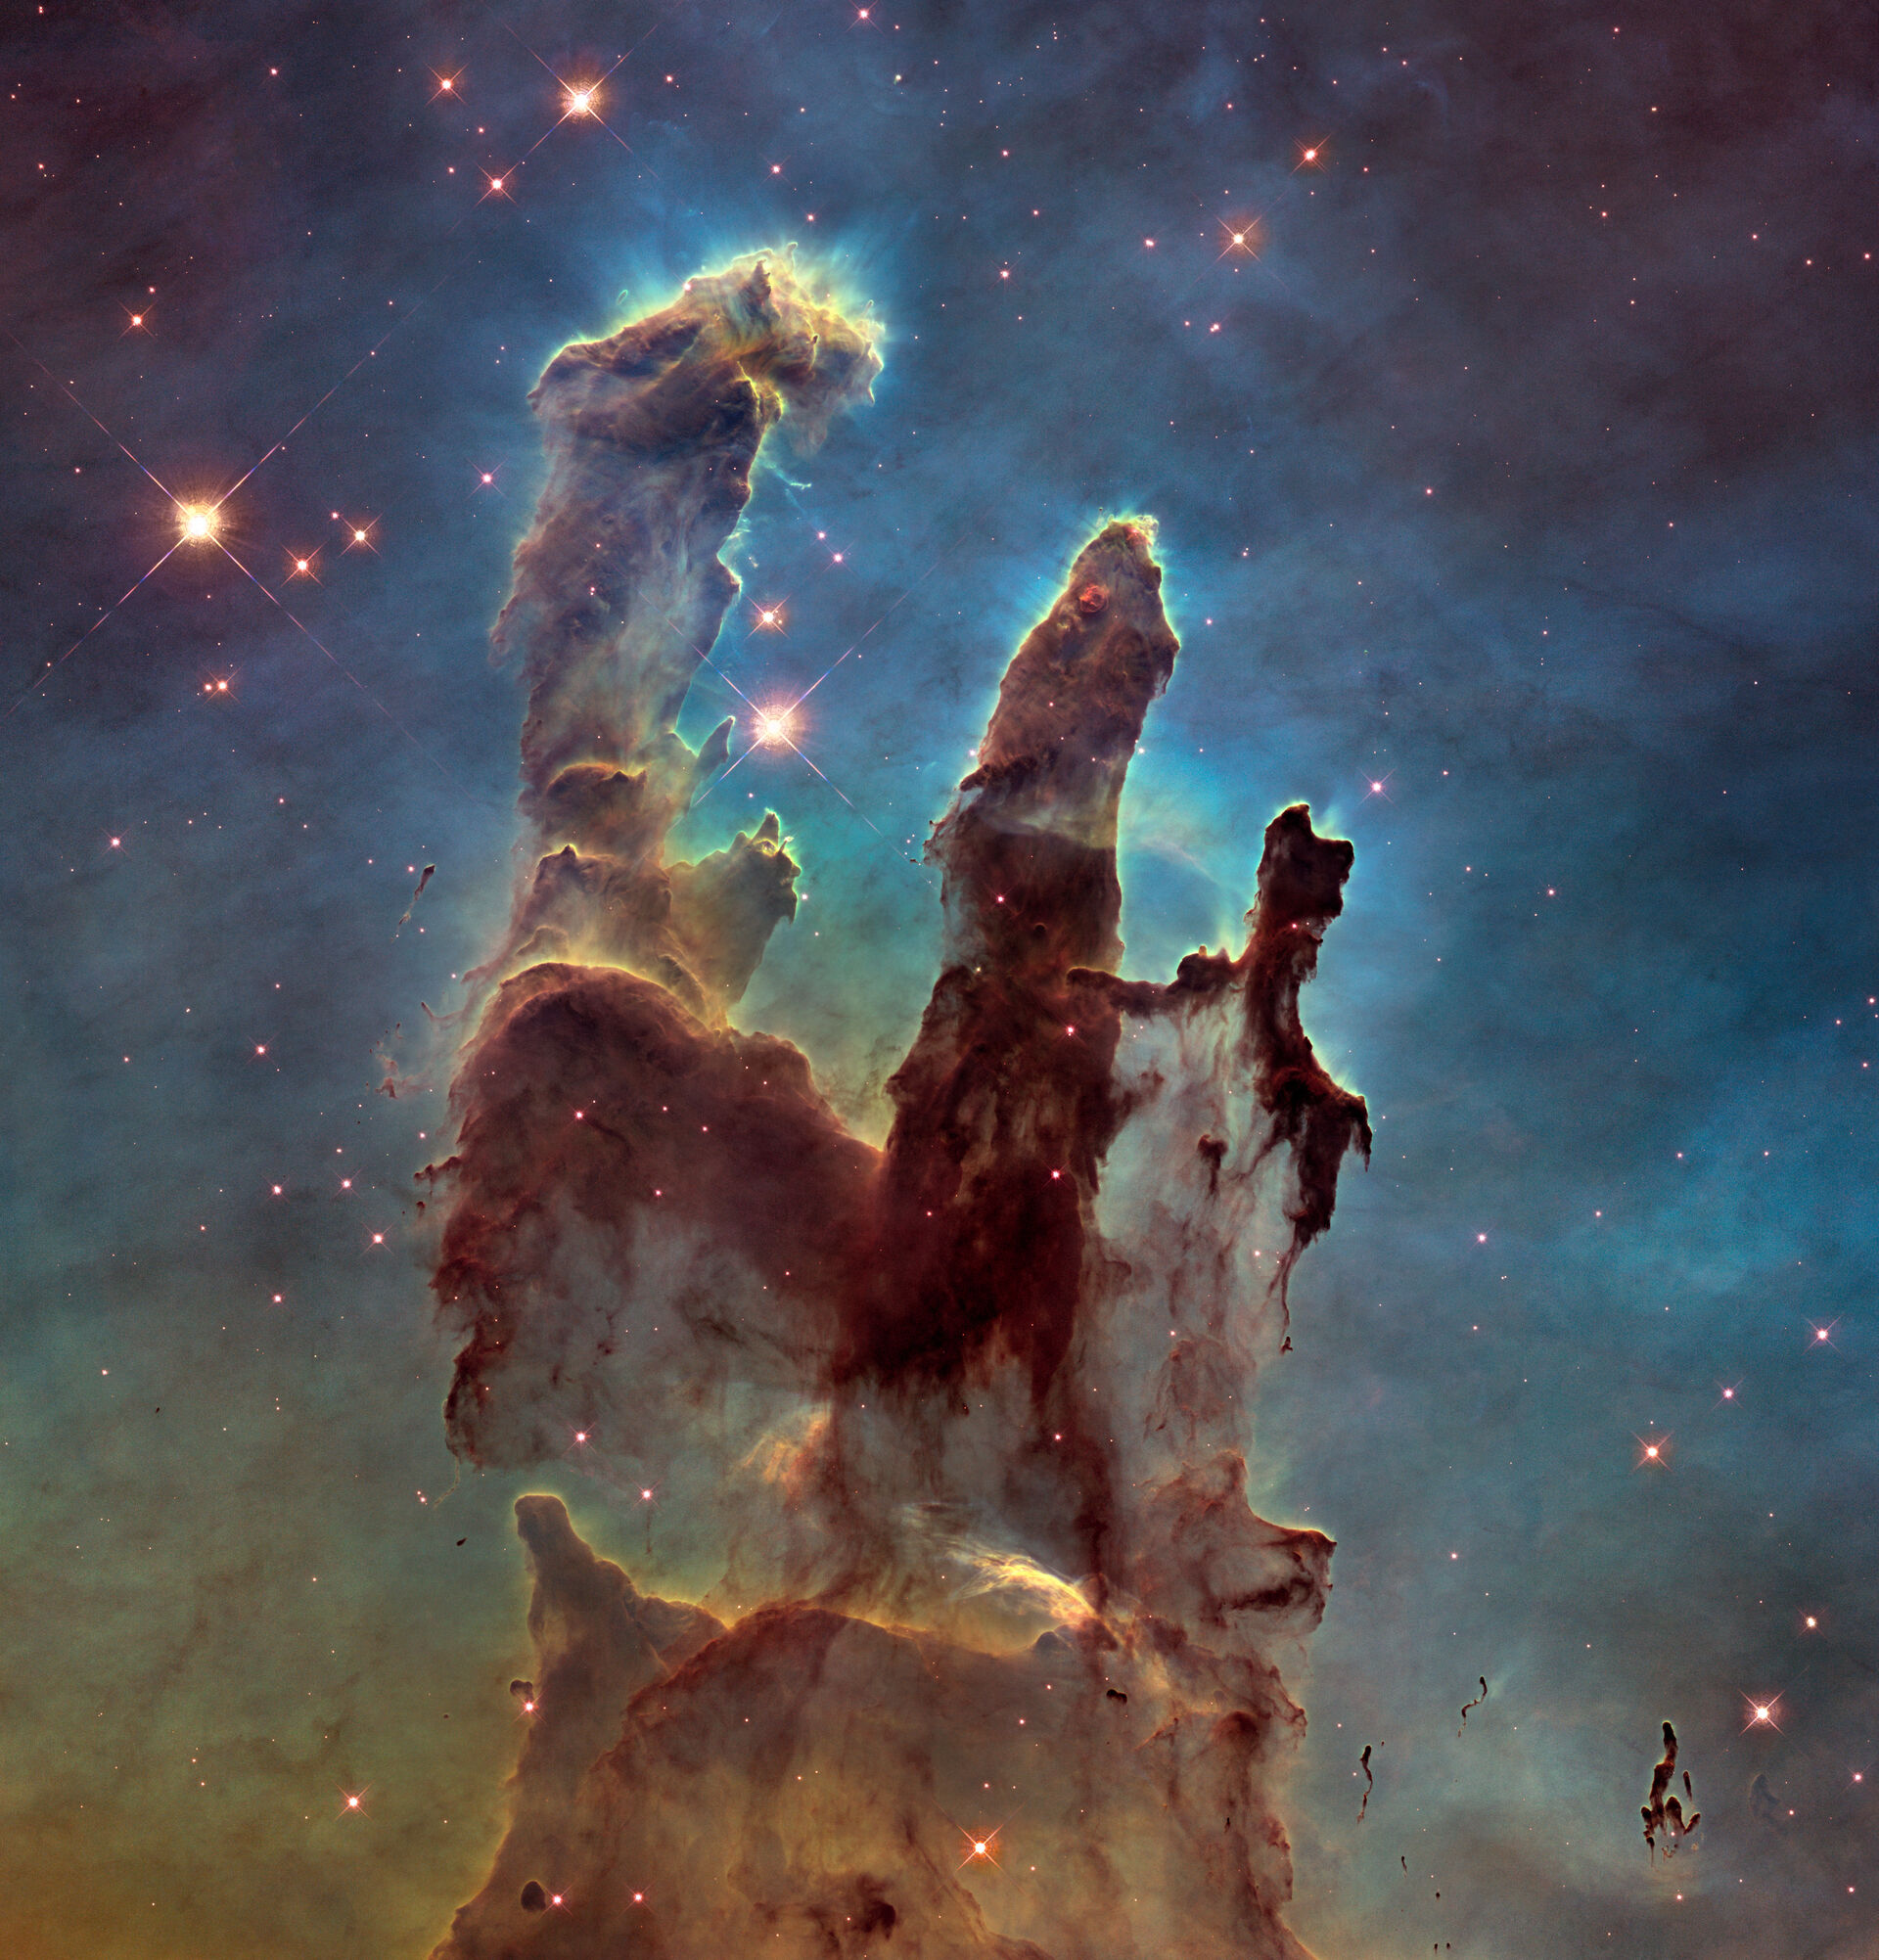 Hubble Space Telescope's image called "the pillar of creation", star forming region in the constellation Serpens. 